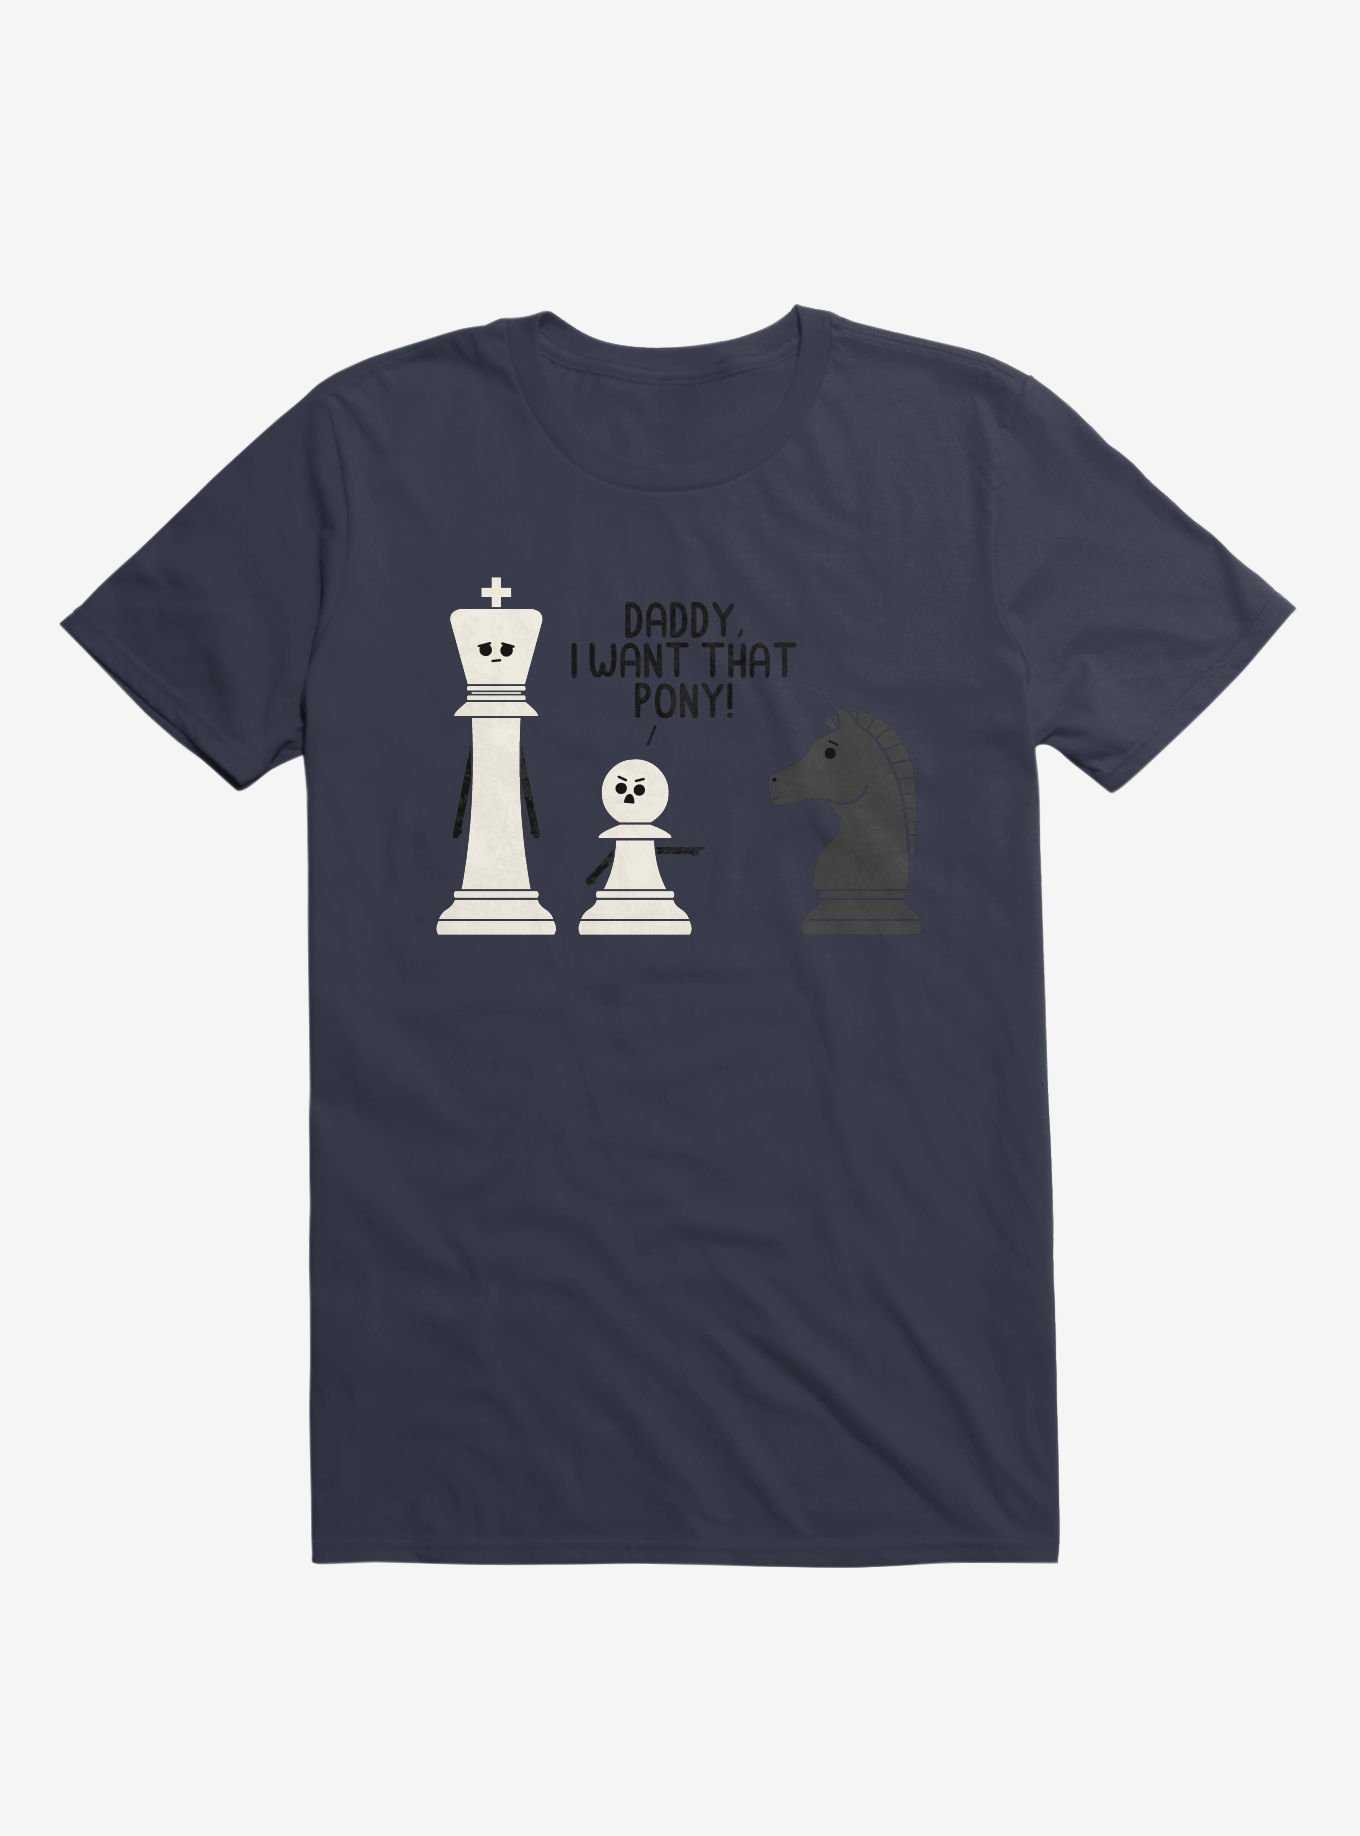 Daddy, I Want That Pony! Chess Pieces Navy Blue T-Shirt, , hi-res